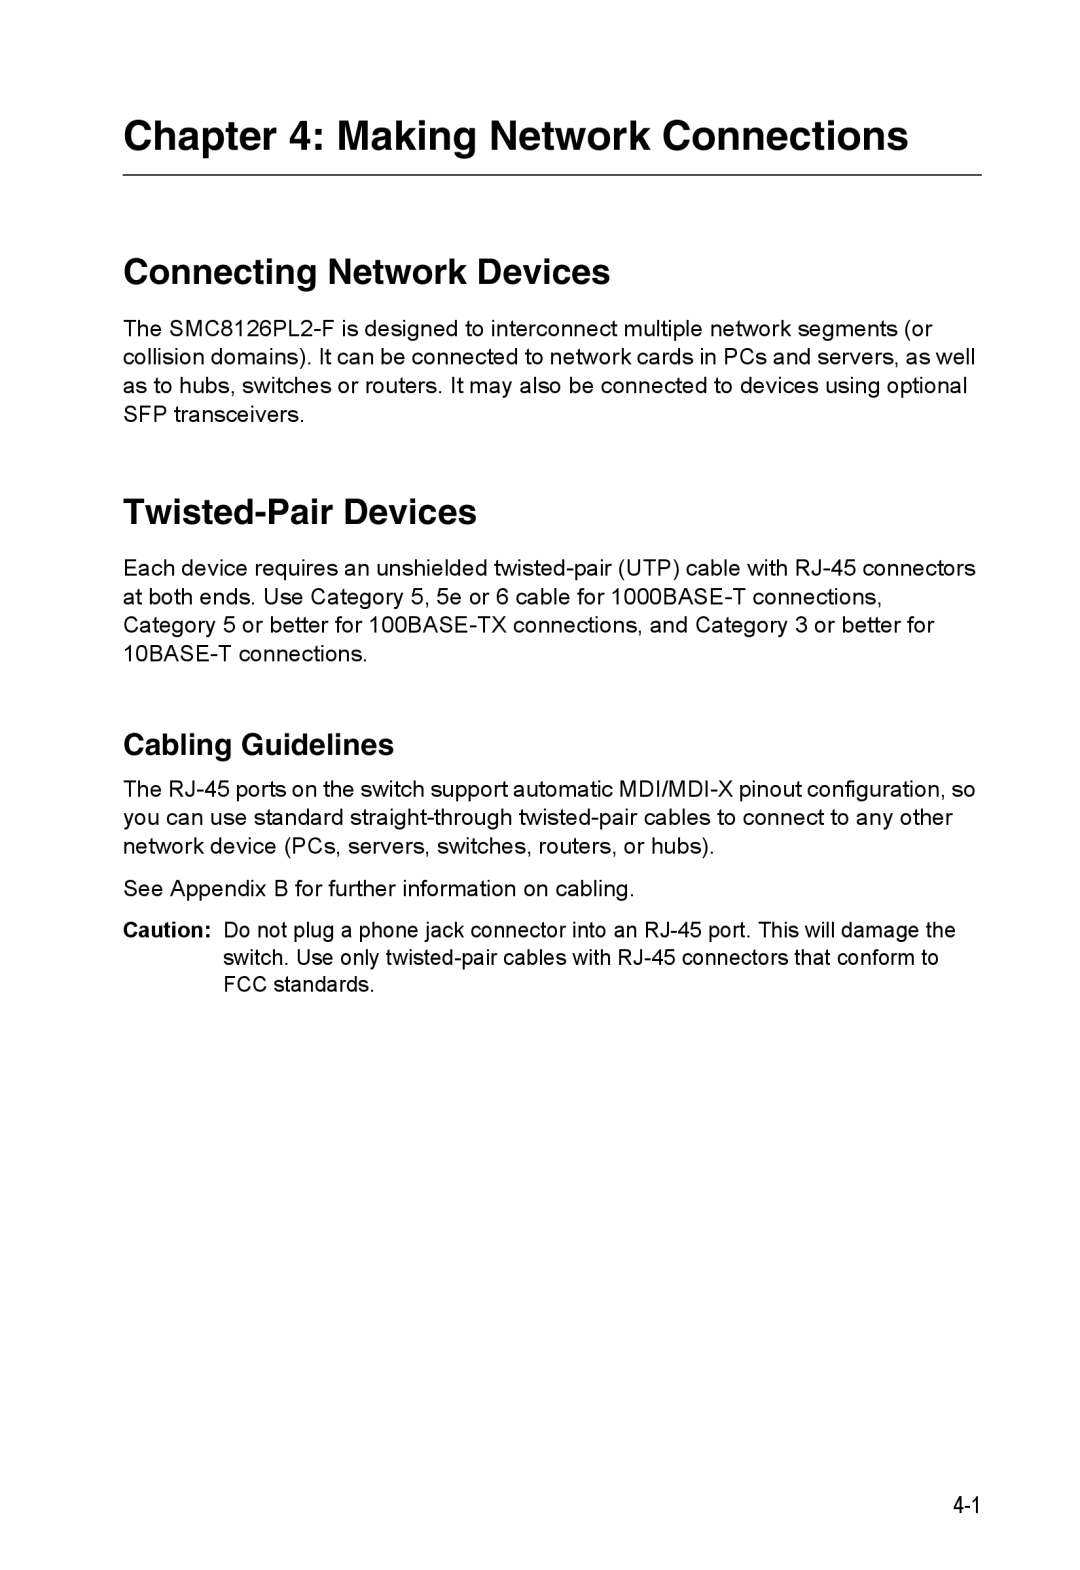 SMC Networks SMC8126PL2-F Making Network Connections, Connecting Network Devices, Twisted-PairDevices, Cabling Guidelines 